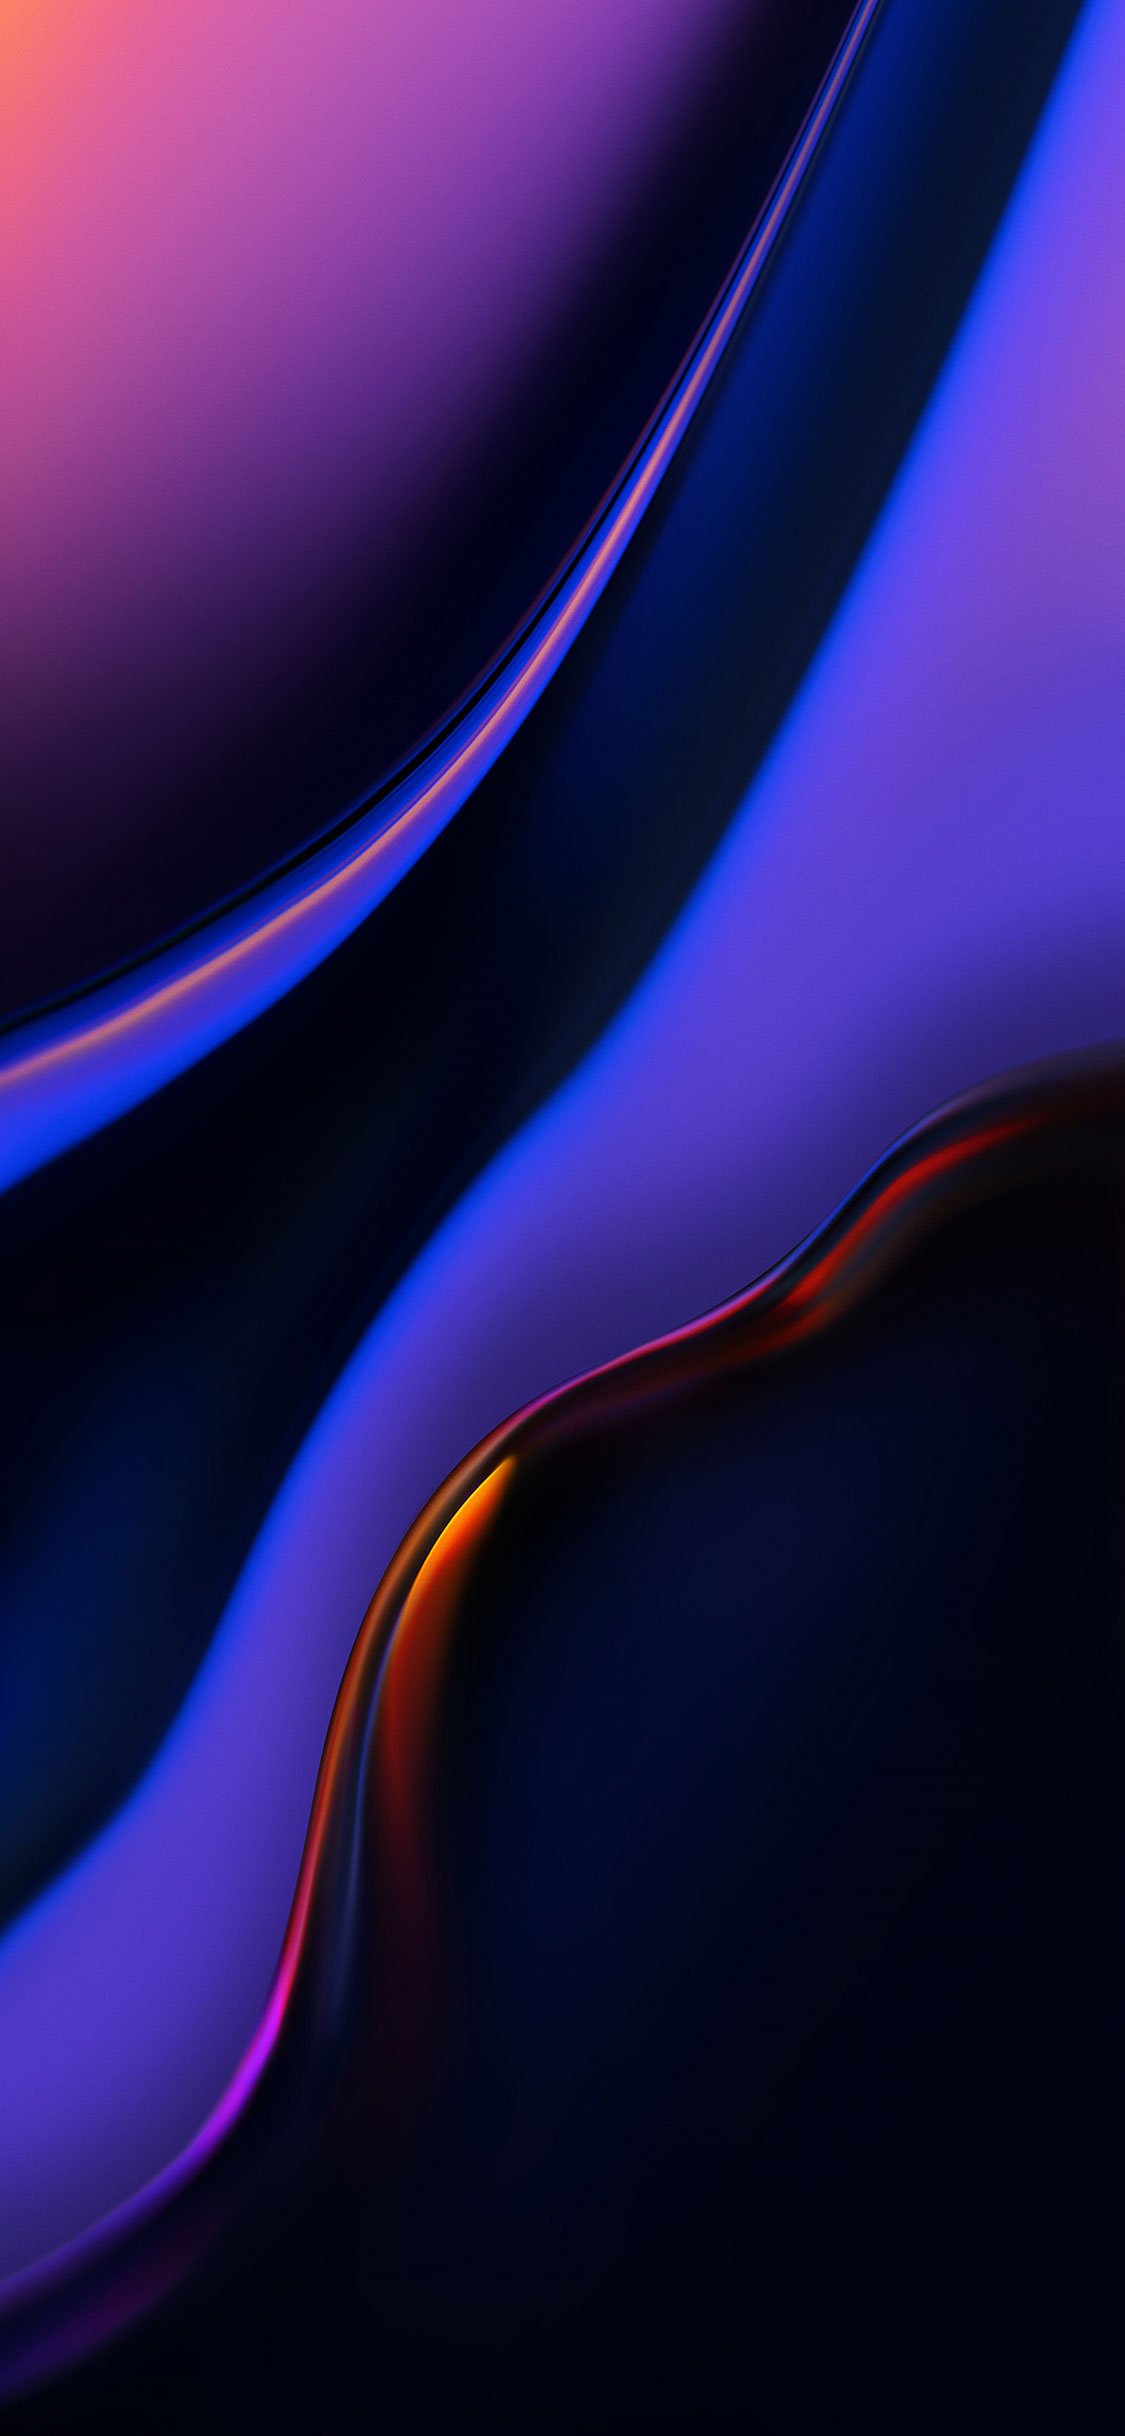 60+ Latest Best iPhone X Wallpapers & Backgrounds For